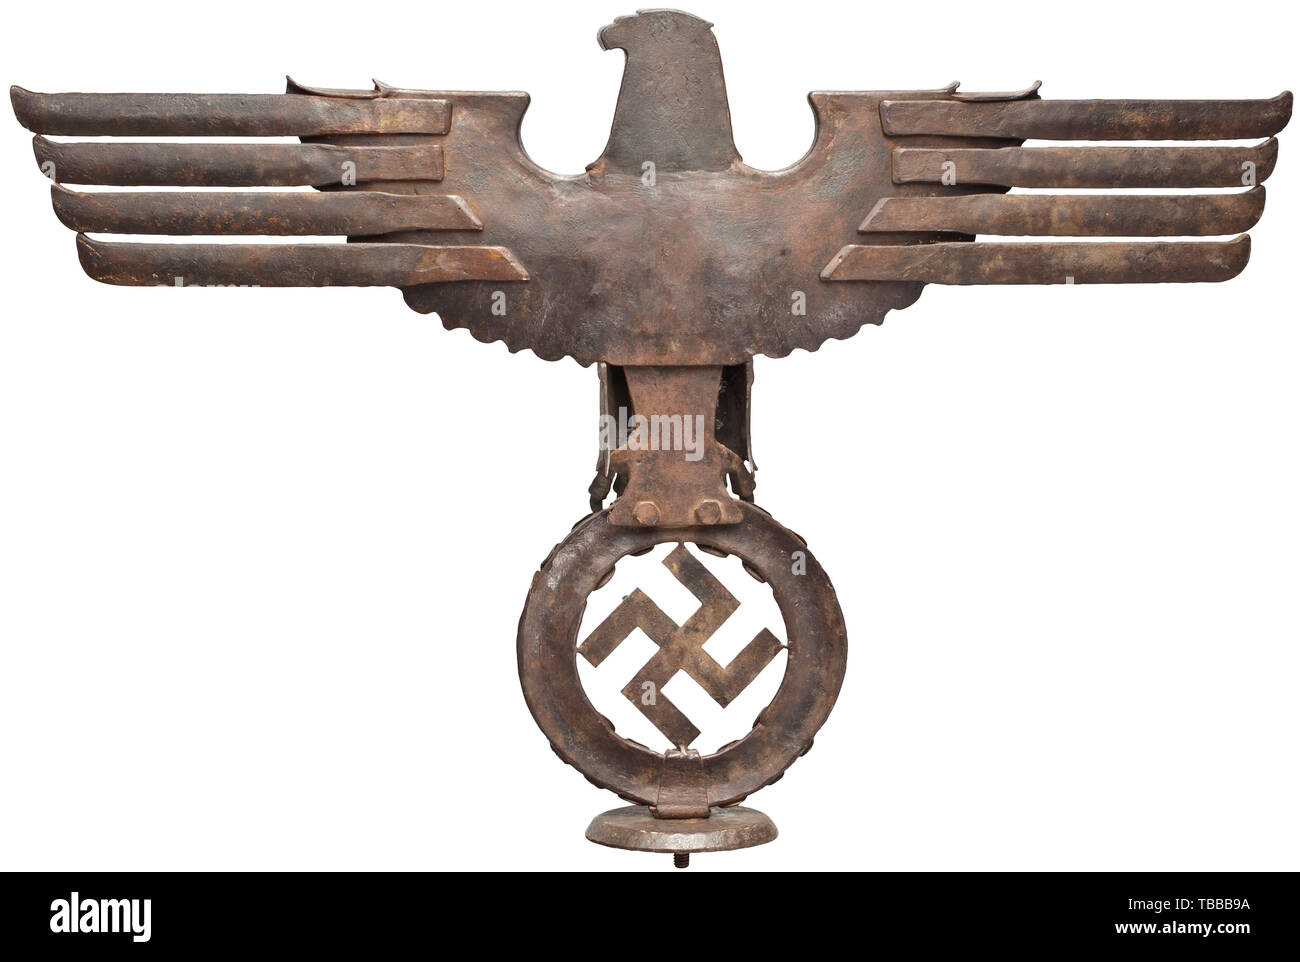 A large wrought-iron national eagle, Eagle with antique bronze patina in half relief. High quality smithery using detailed-chased iron sheets with separately applied feathers, wings, claws and oak leaf wreath with swastika. Complete with fastening threads and intermediary plate, also of wrought iron. Height circa 58 cm, wing span circa 91 cm. historic, historical 20th century, Editorial-Use-Only Stock Photo